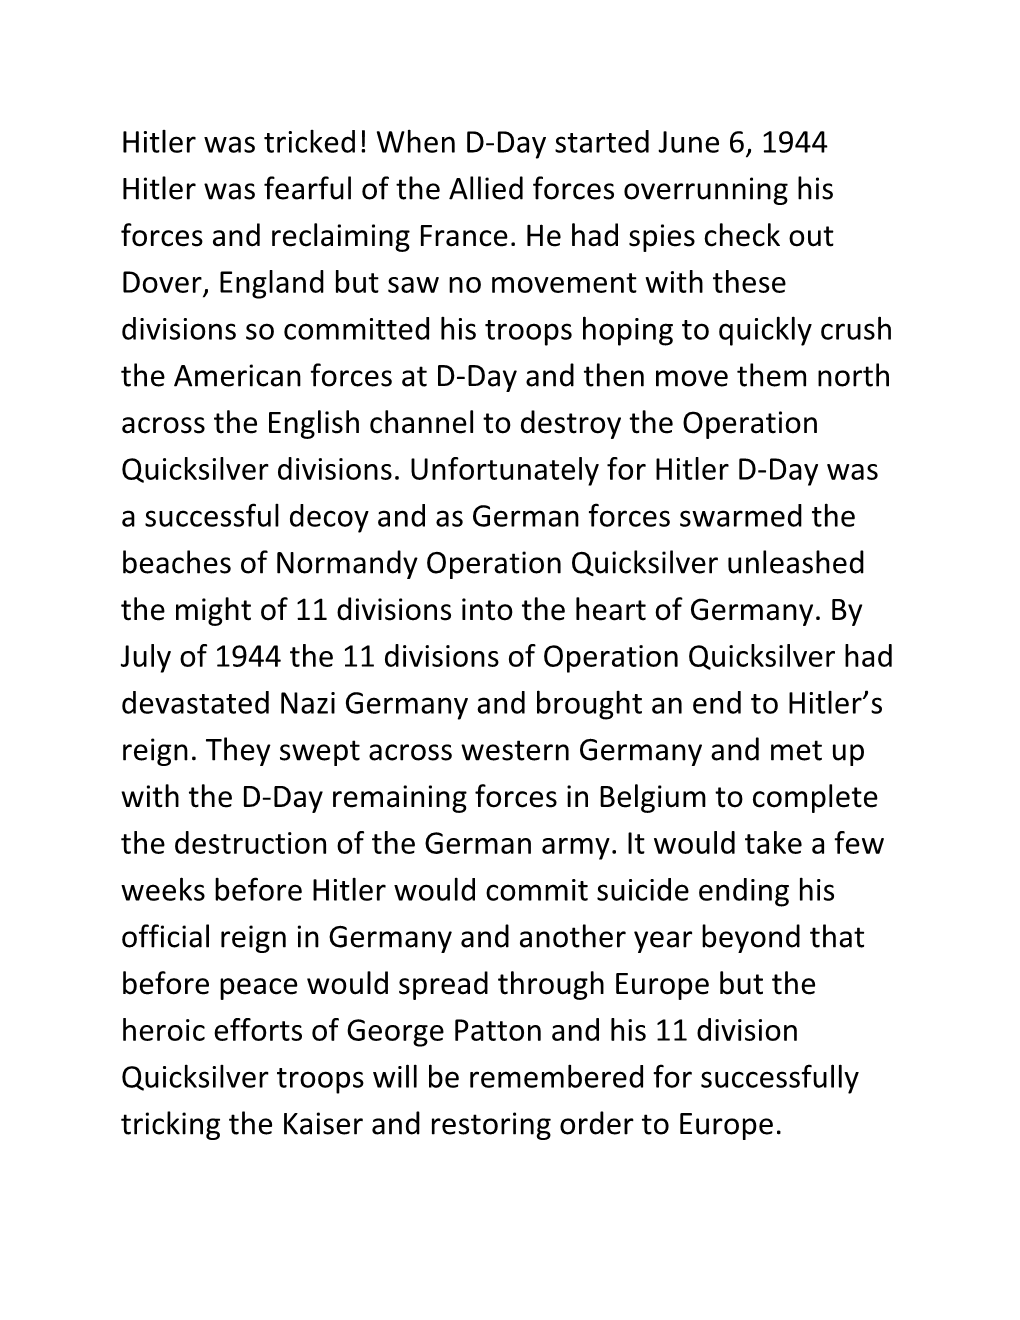 Operation Quicksilver and D-Day